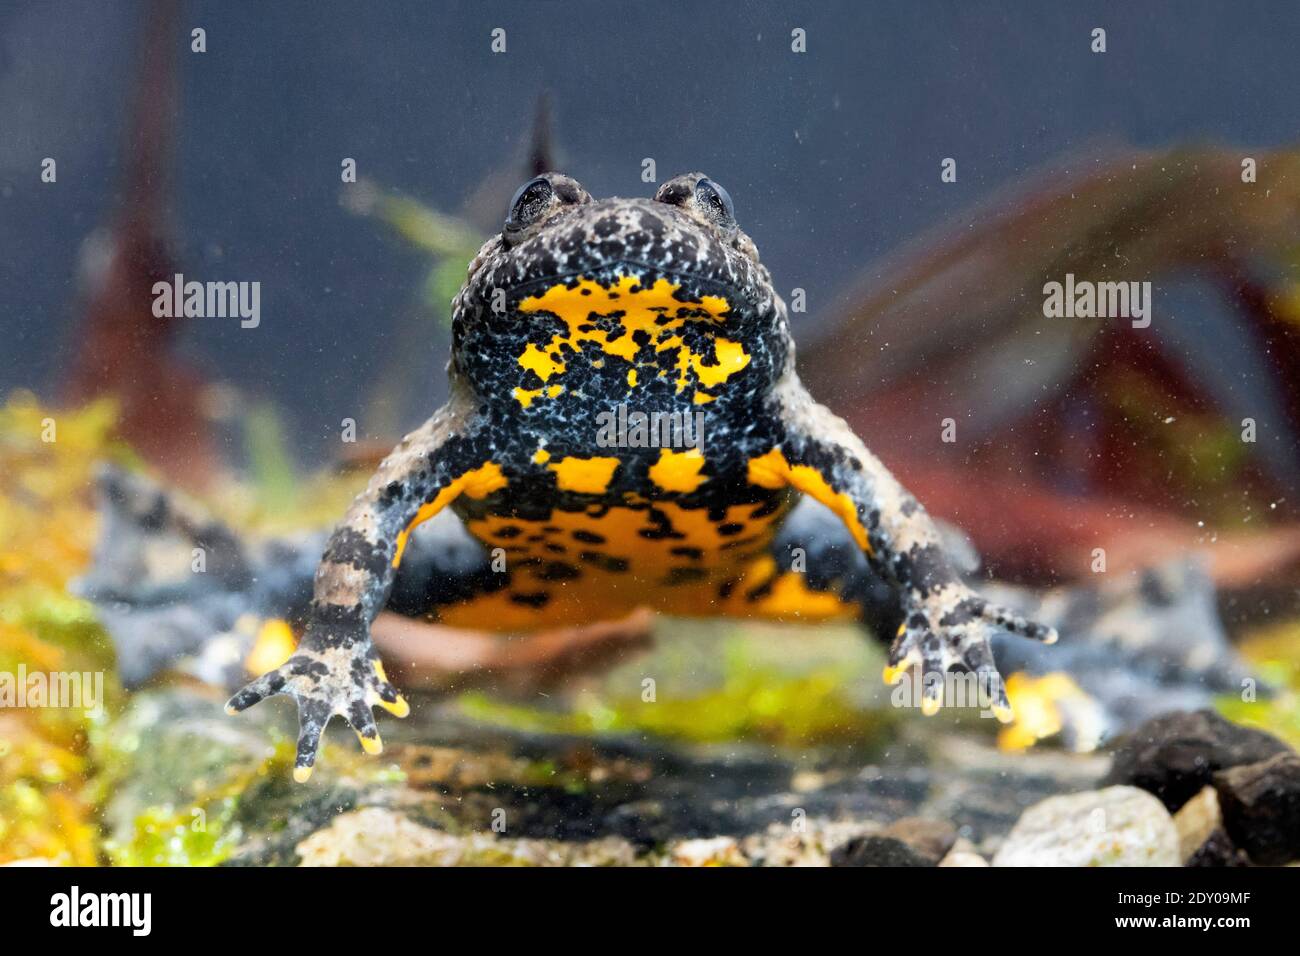 Apennine Yellow-bellied Toad (Bombina pachypus), front view of an adult underwater, Campania, Italy Stock Photo